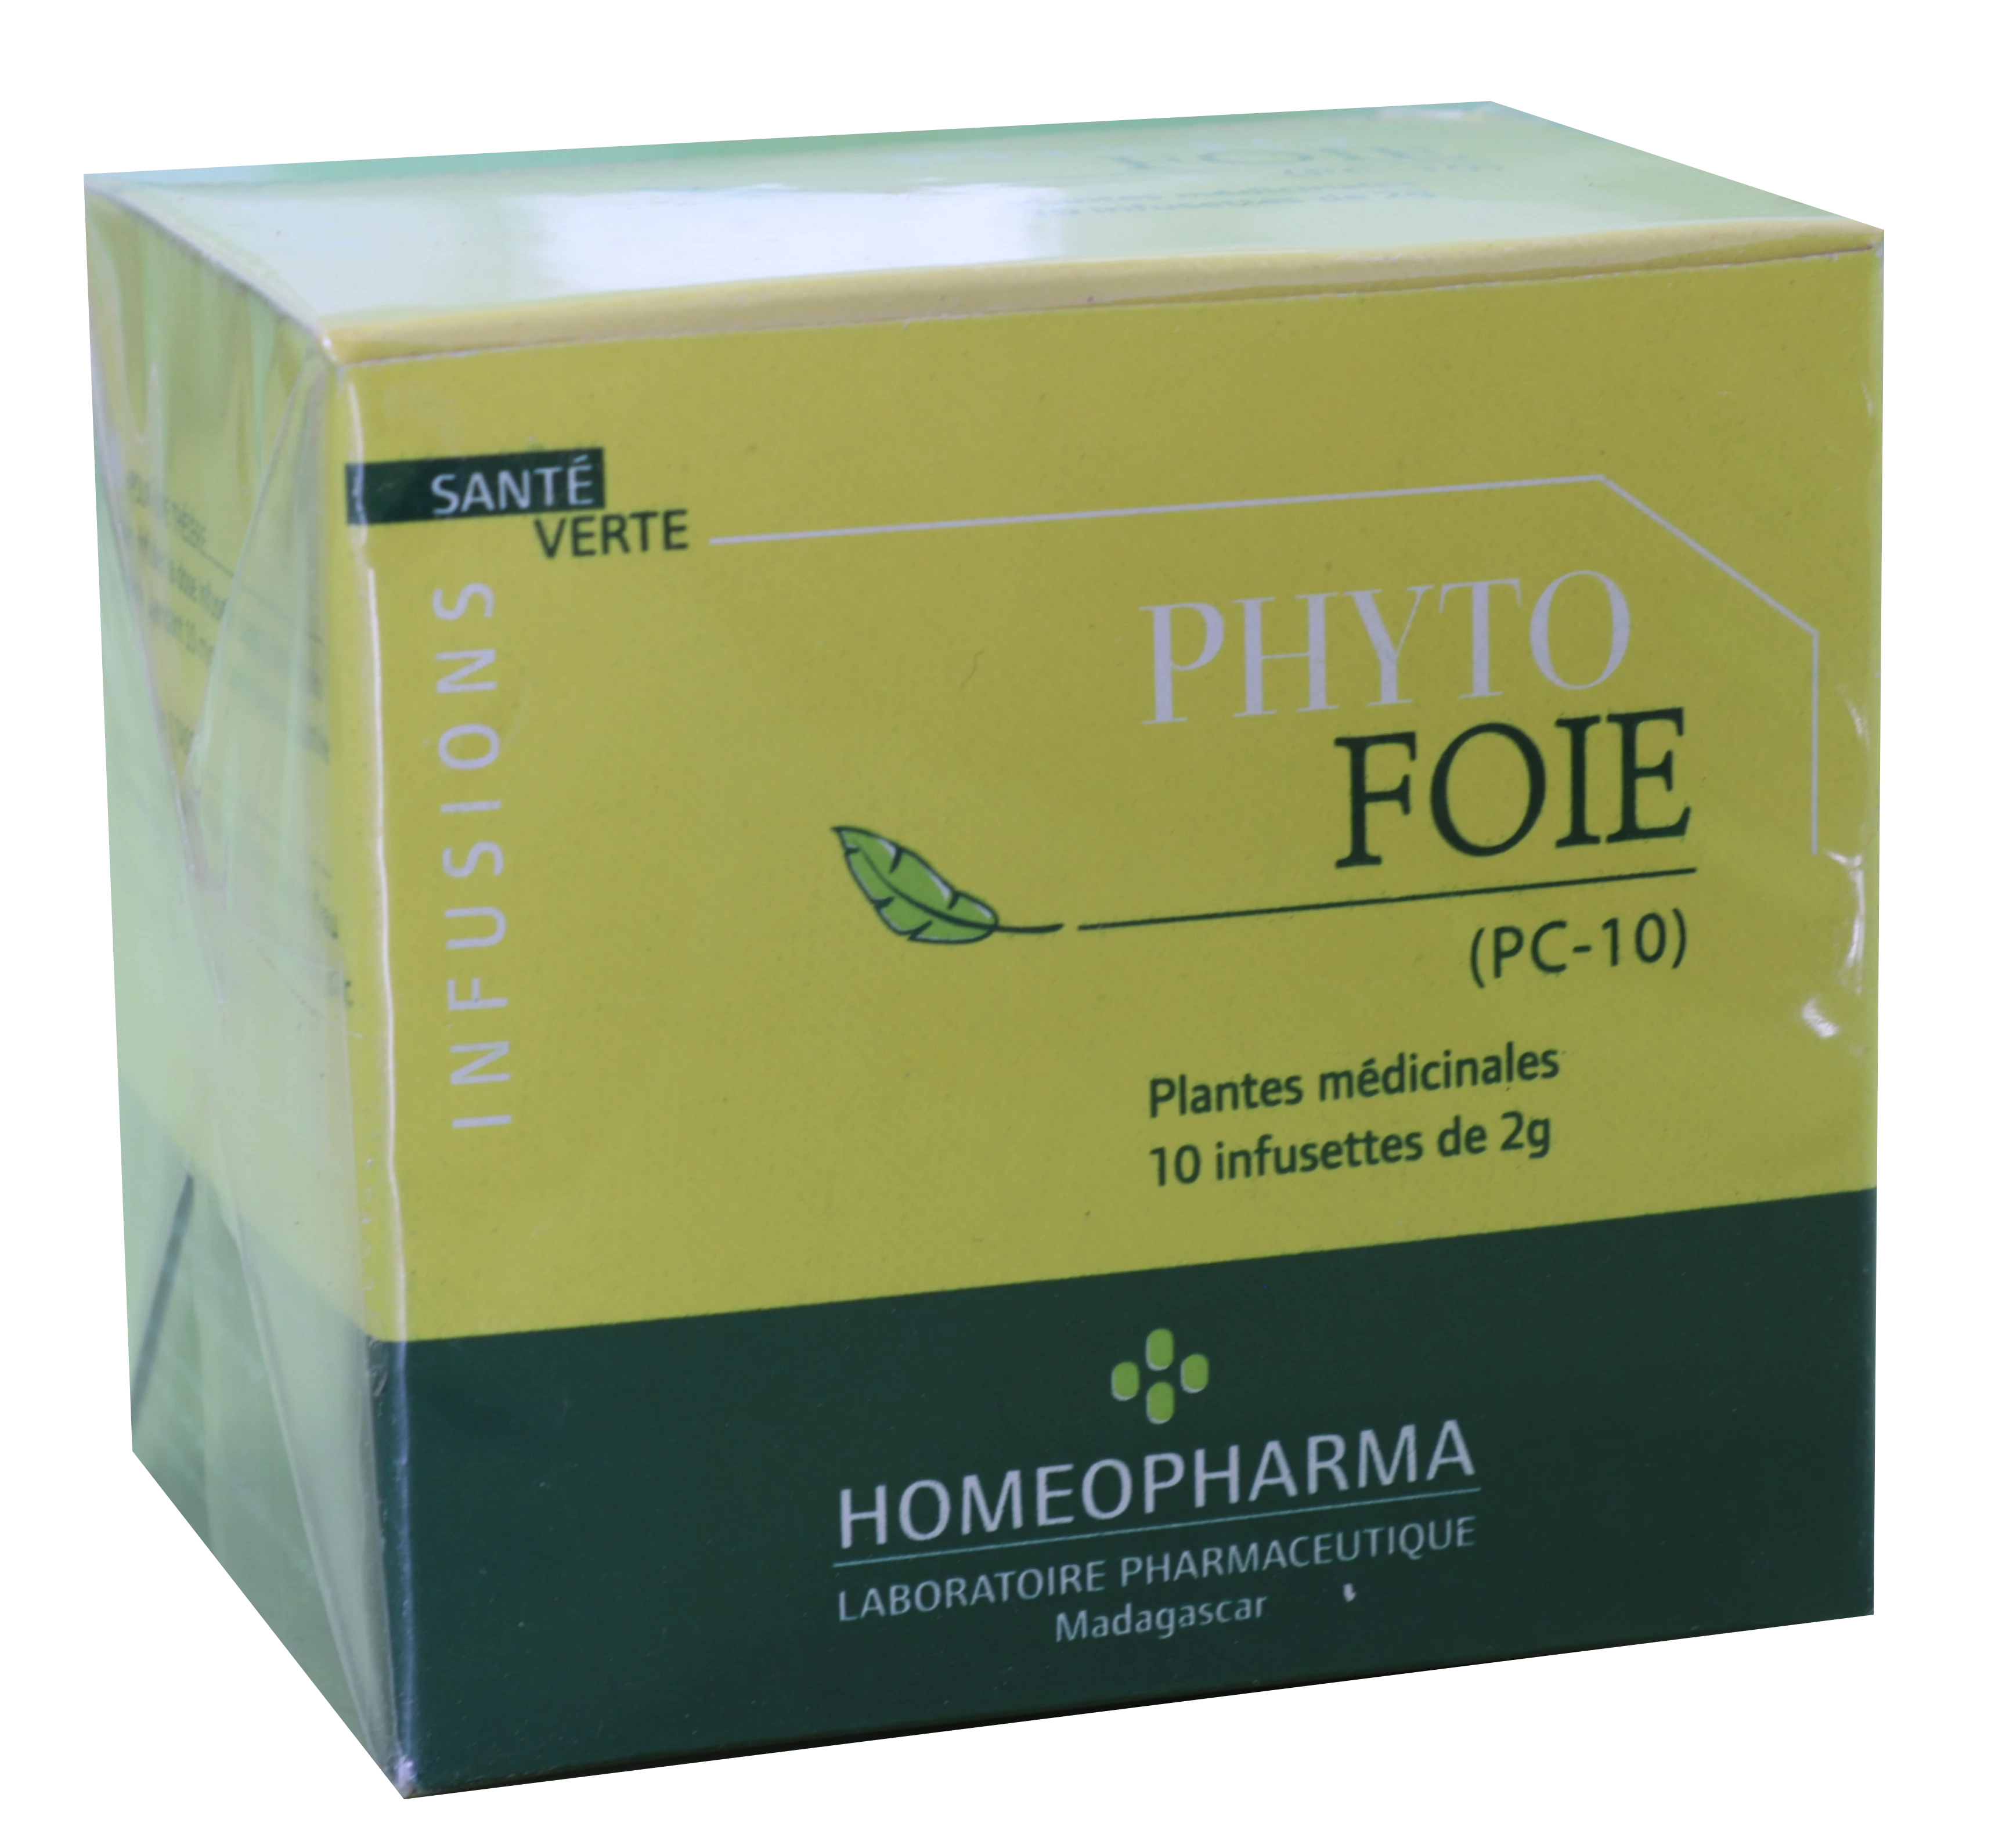 Phytotherapie Traditionnelle  Pc10-phyto-foie Bte / 20 Infusettes - Homeopharma